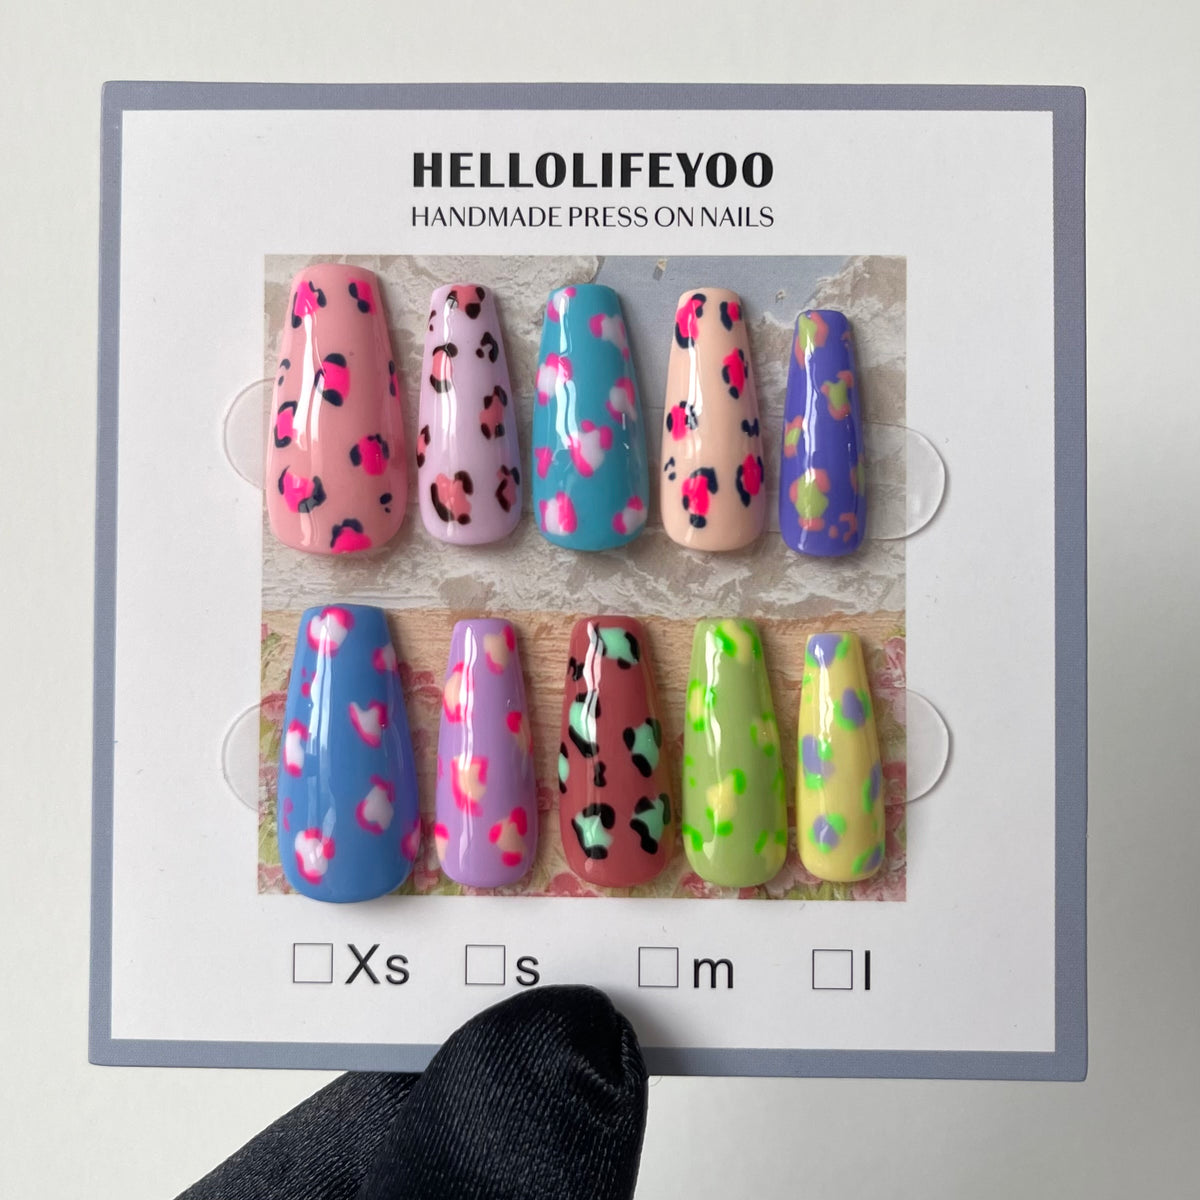 COLORFUL LEOPARD PRINT-TEN PIECES OF HANDCRAFTED PRESS ON NAIL